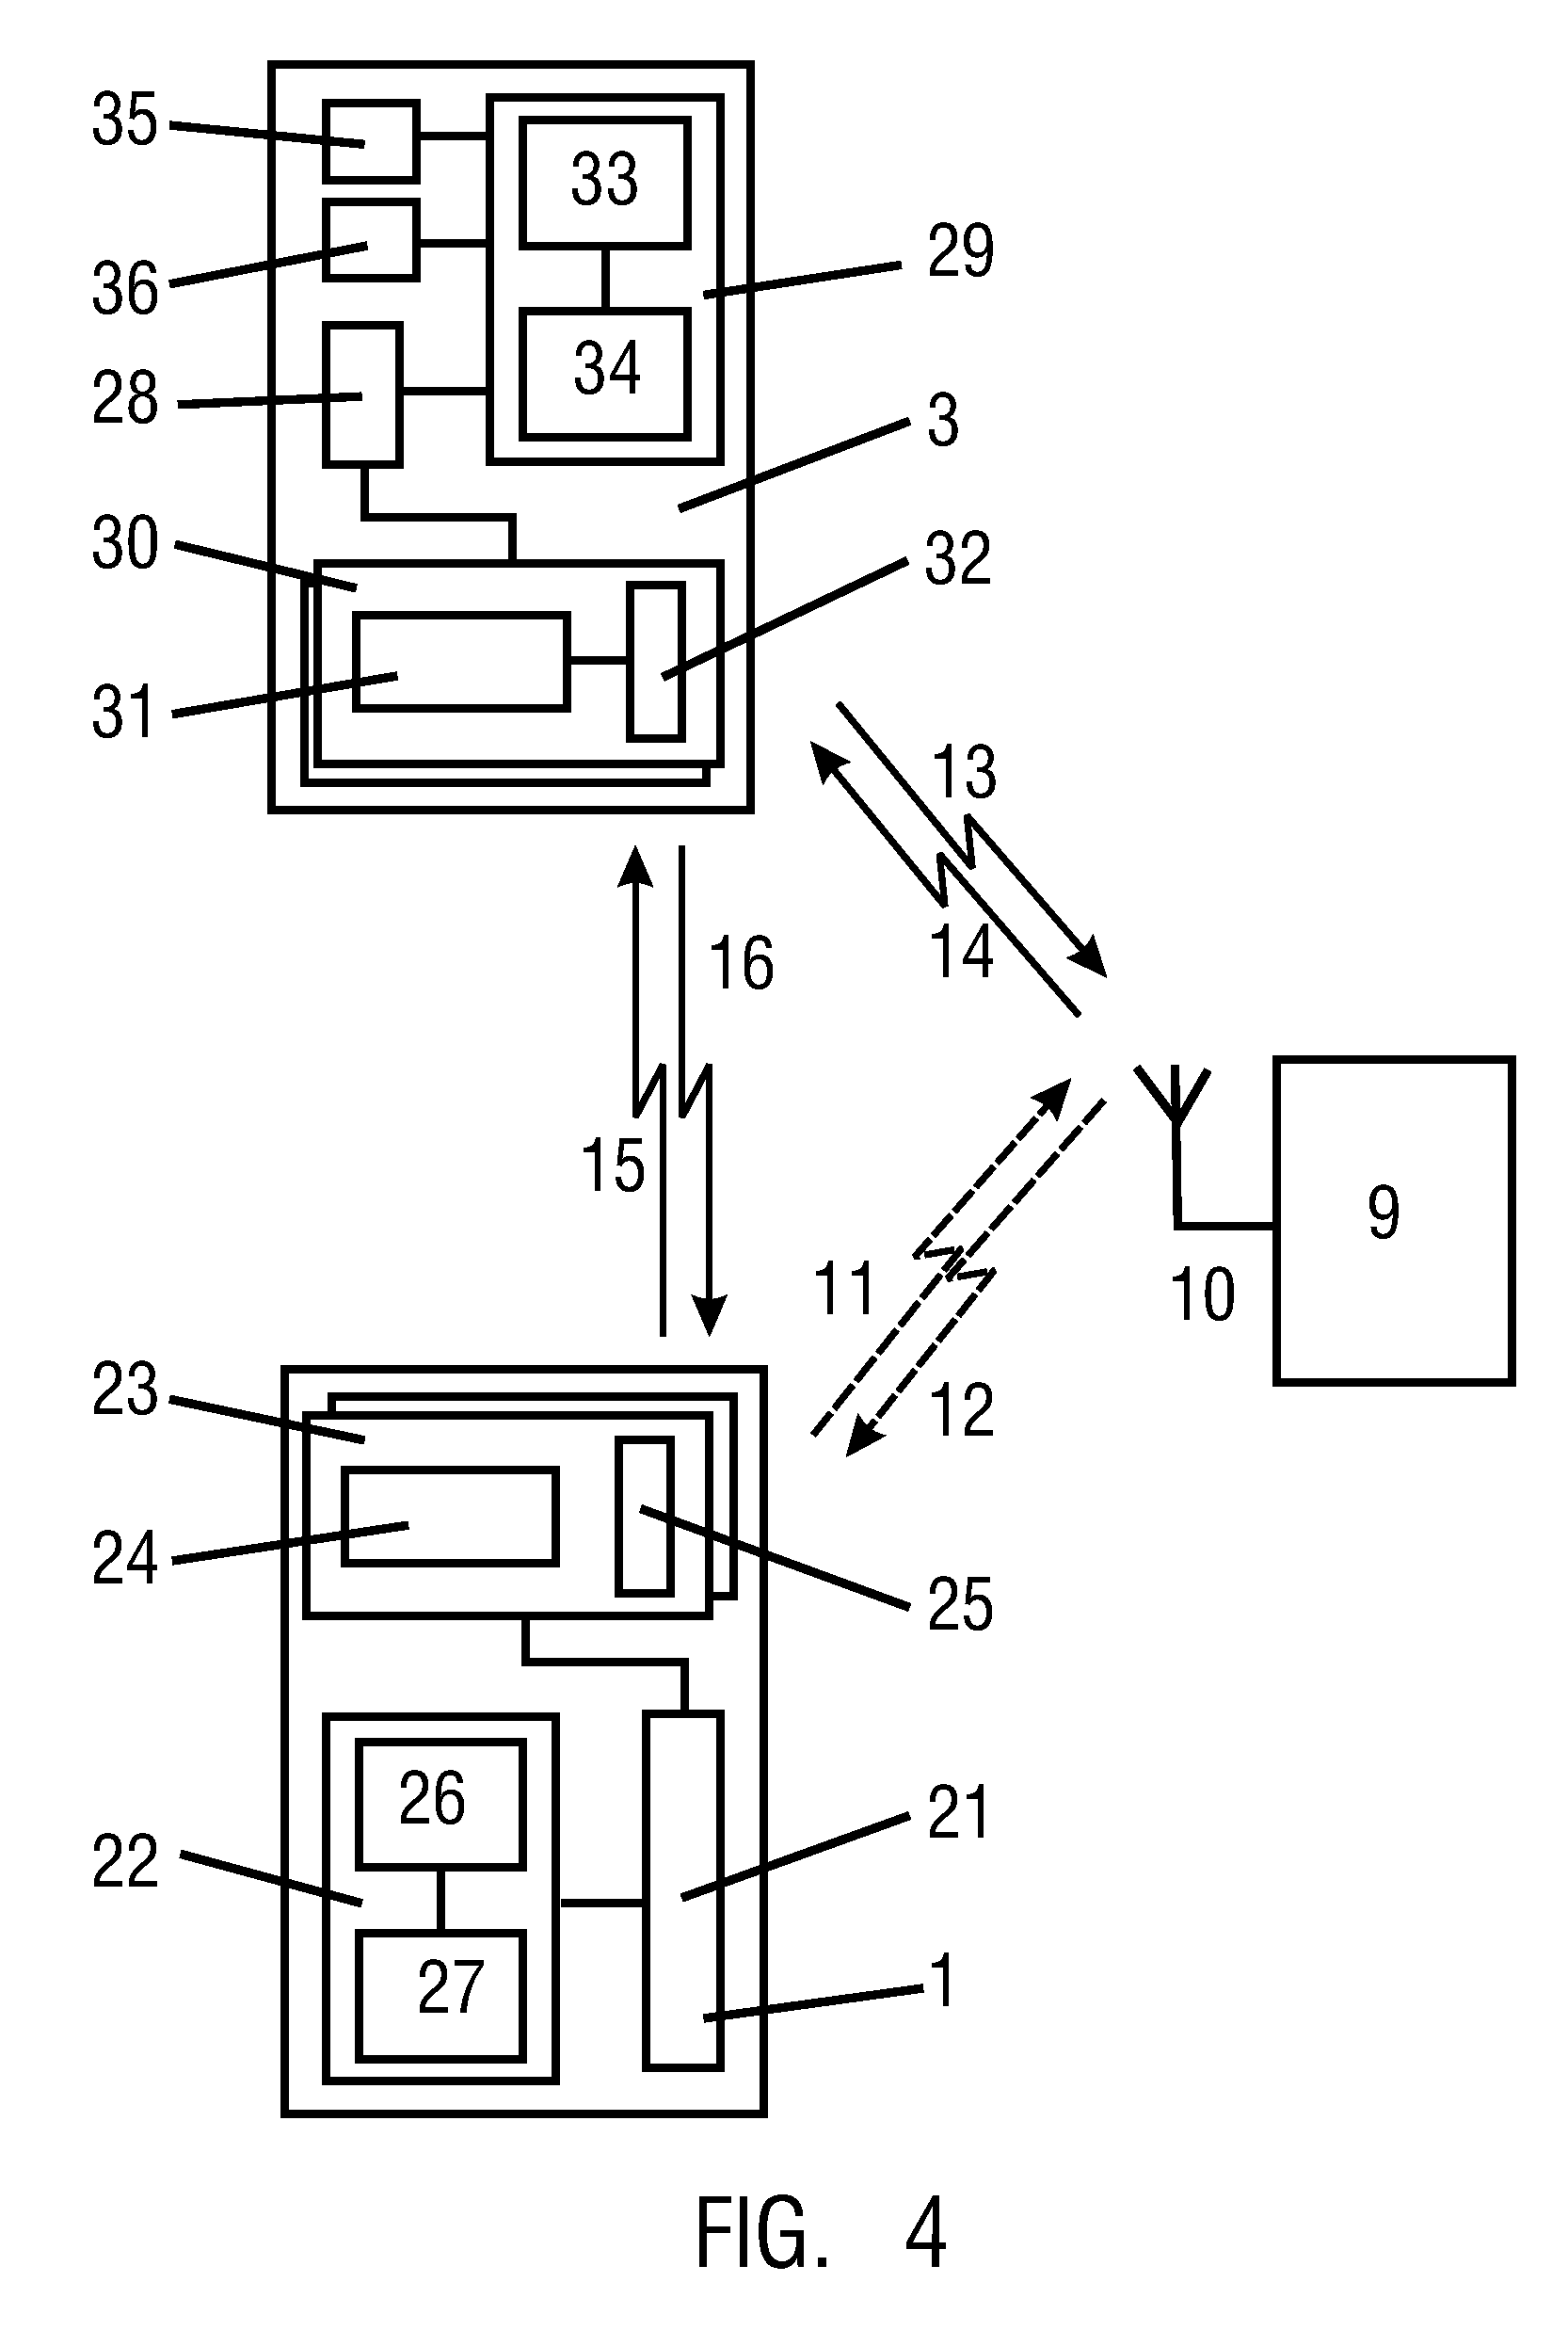 Method of transmitting a message in a mobile communications system using a mobile repeater